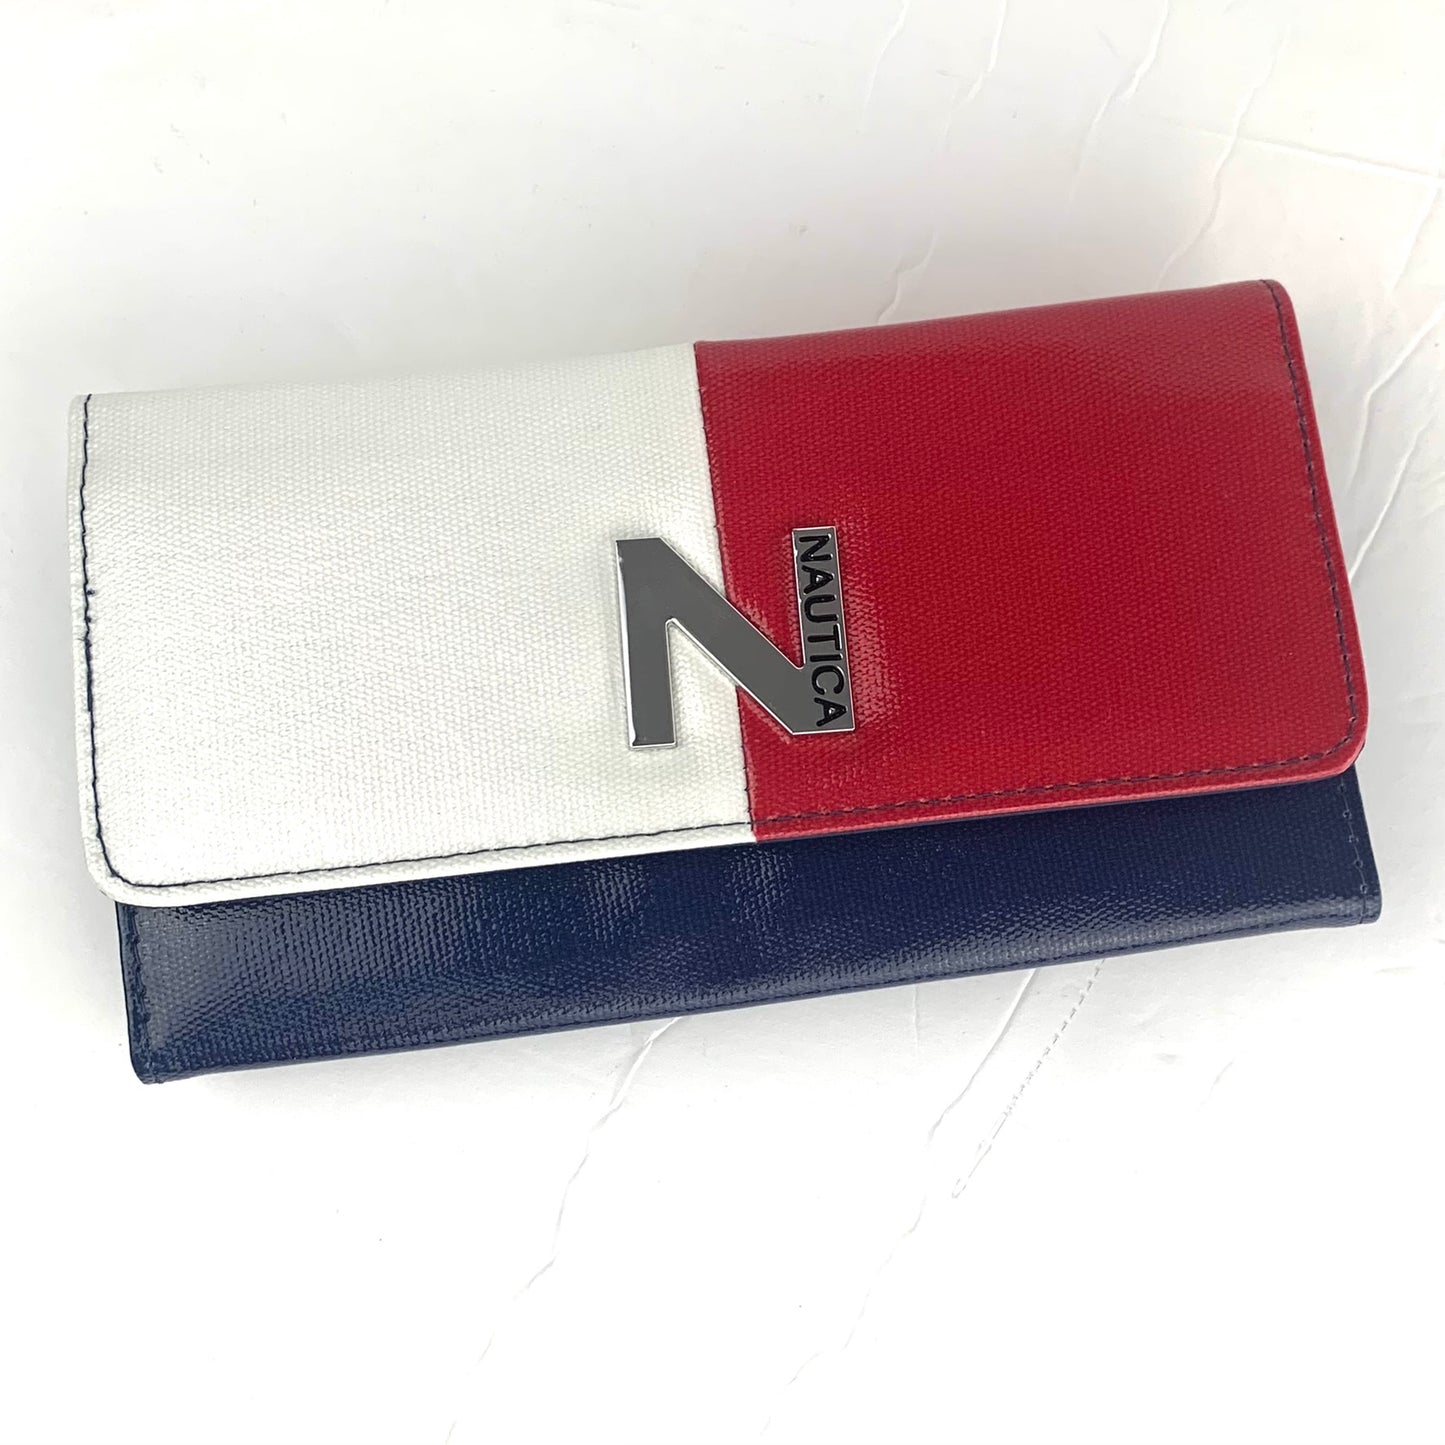 Money Manager Navy/Red/White Silver N Logo Women's Wallet Bag